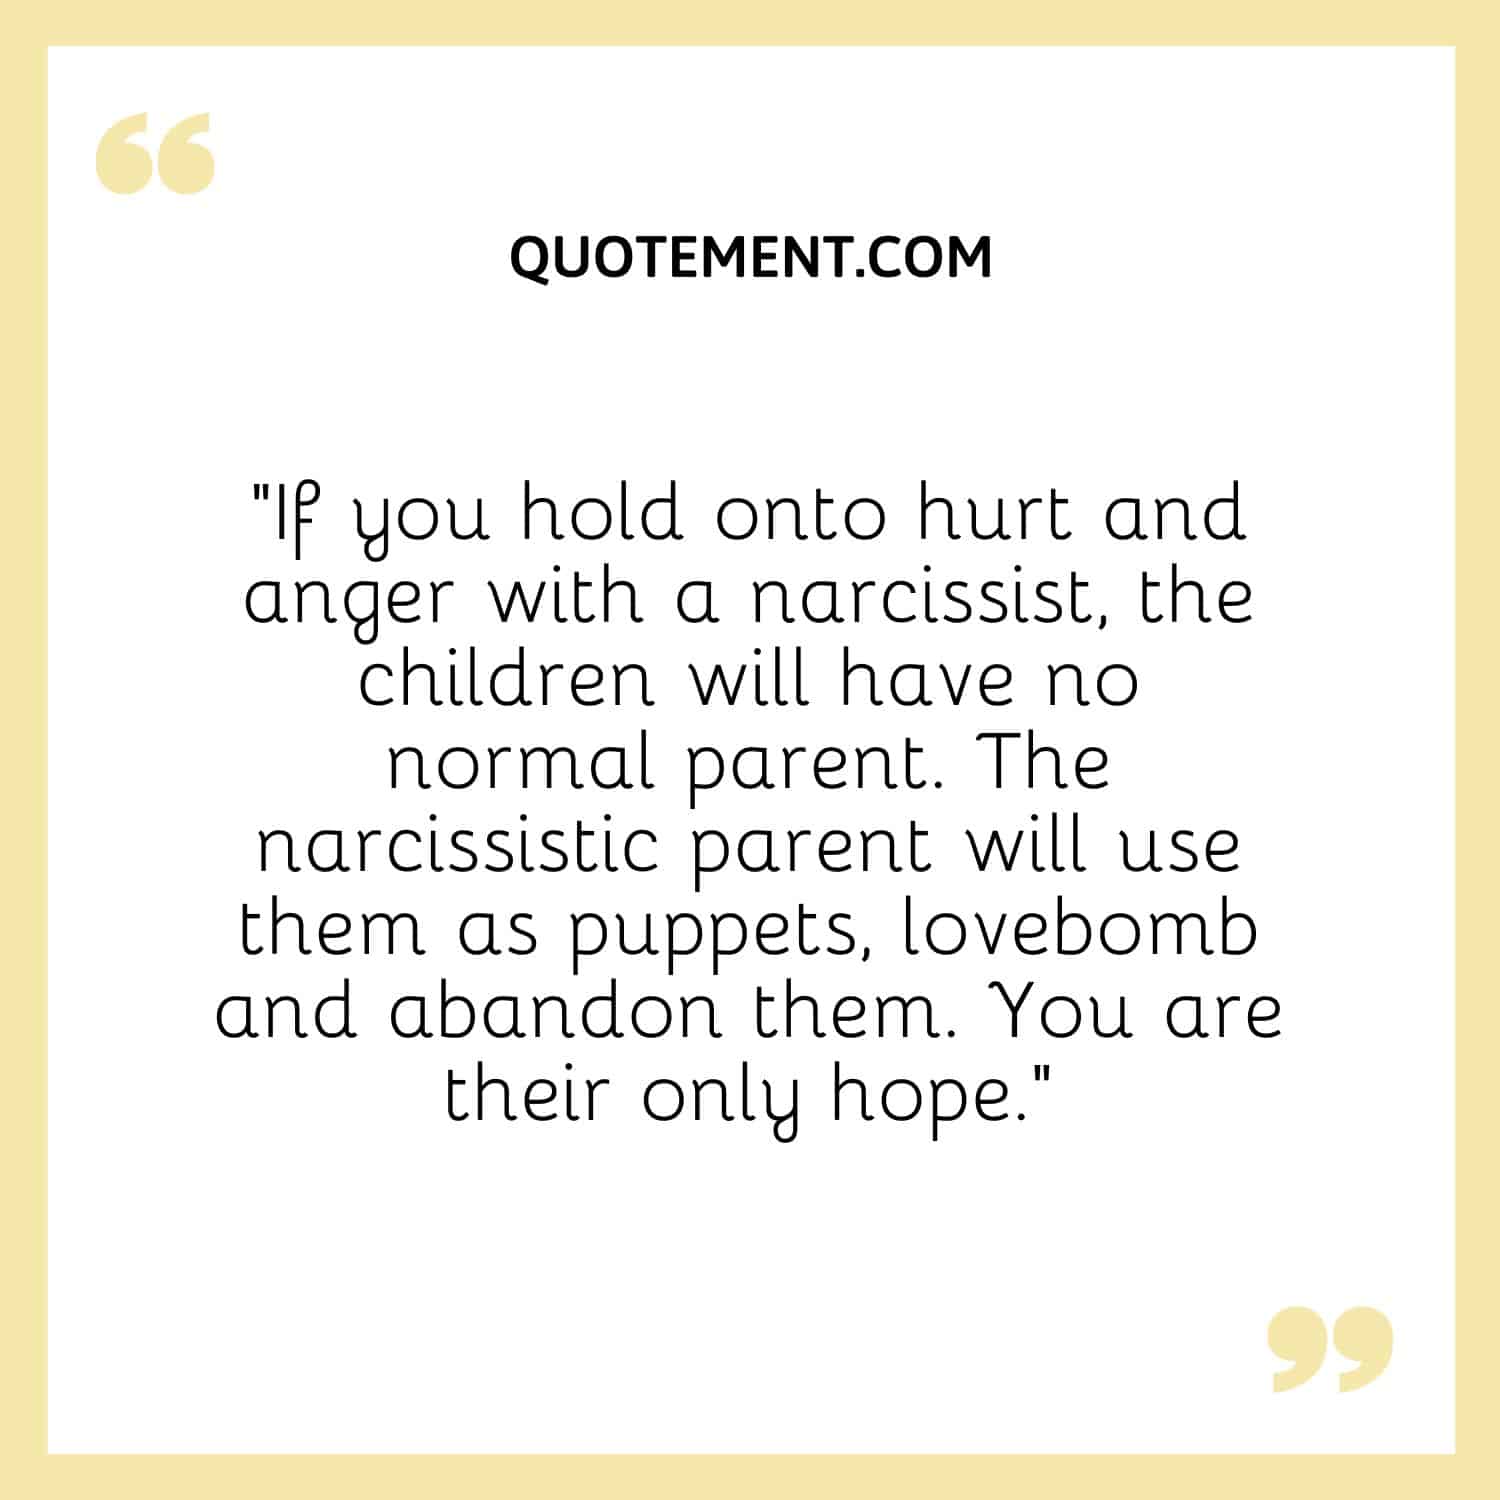 If you hold onto hurt and anger with a narcissist, the children will have no normal parent